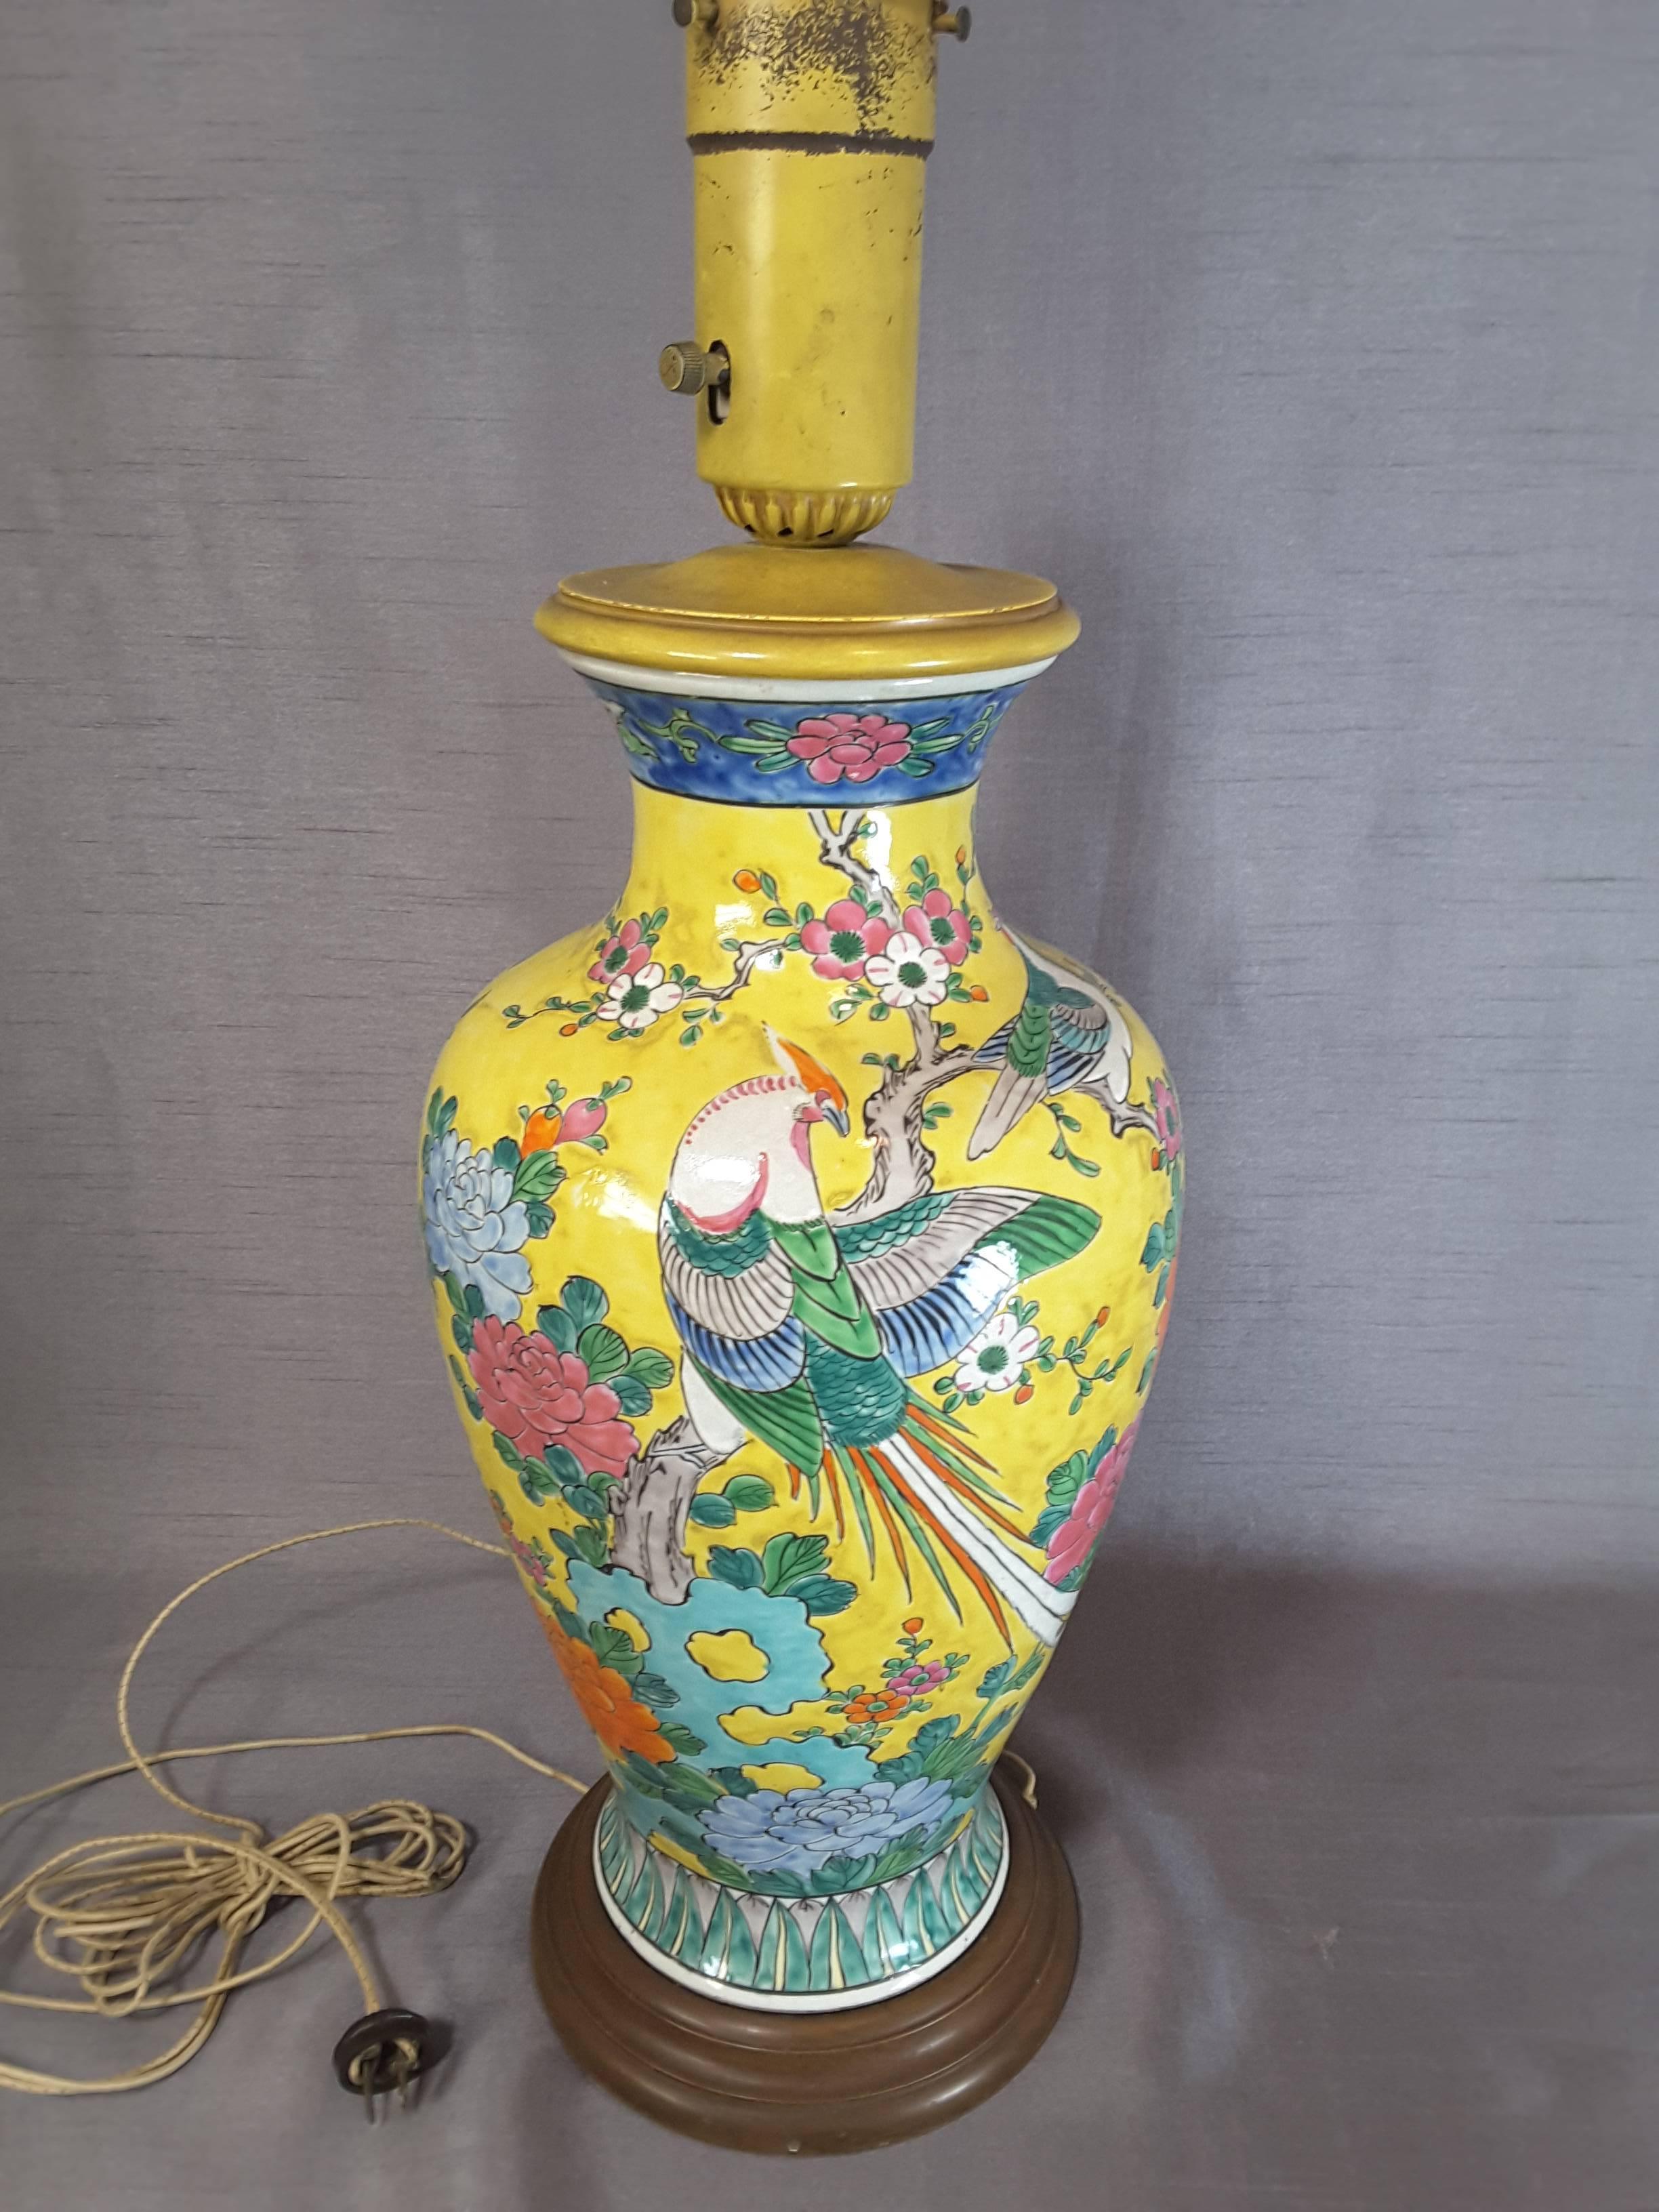 Chinese Imperial yellow large table lamp with pheasant, birds, flowers and foliage. Baluster shaped vase mounted for a lamp. The lamp is done in ceramic, decorated in bright vibrant colors and glazed, mounted on a wood base, top yellow cap with